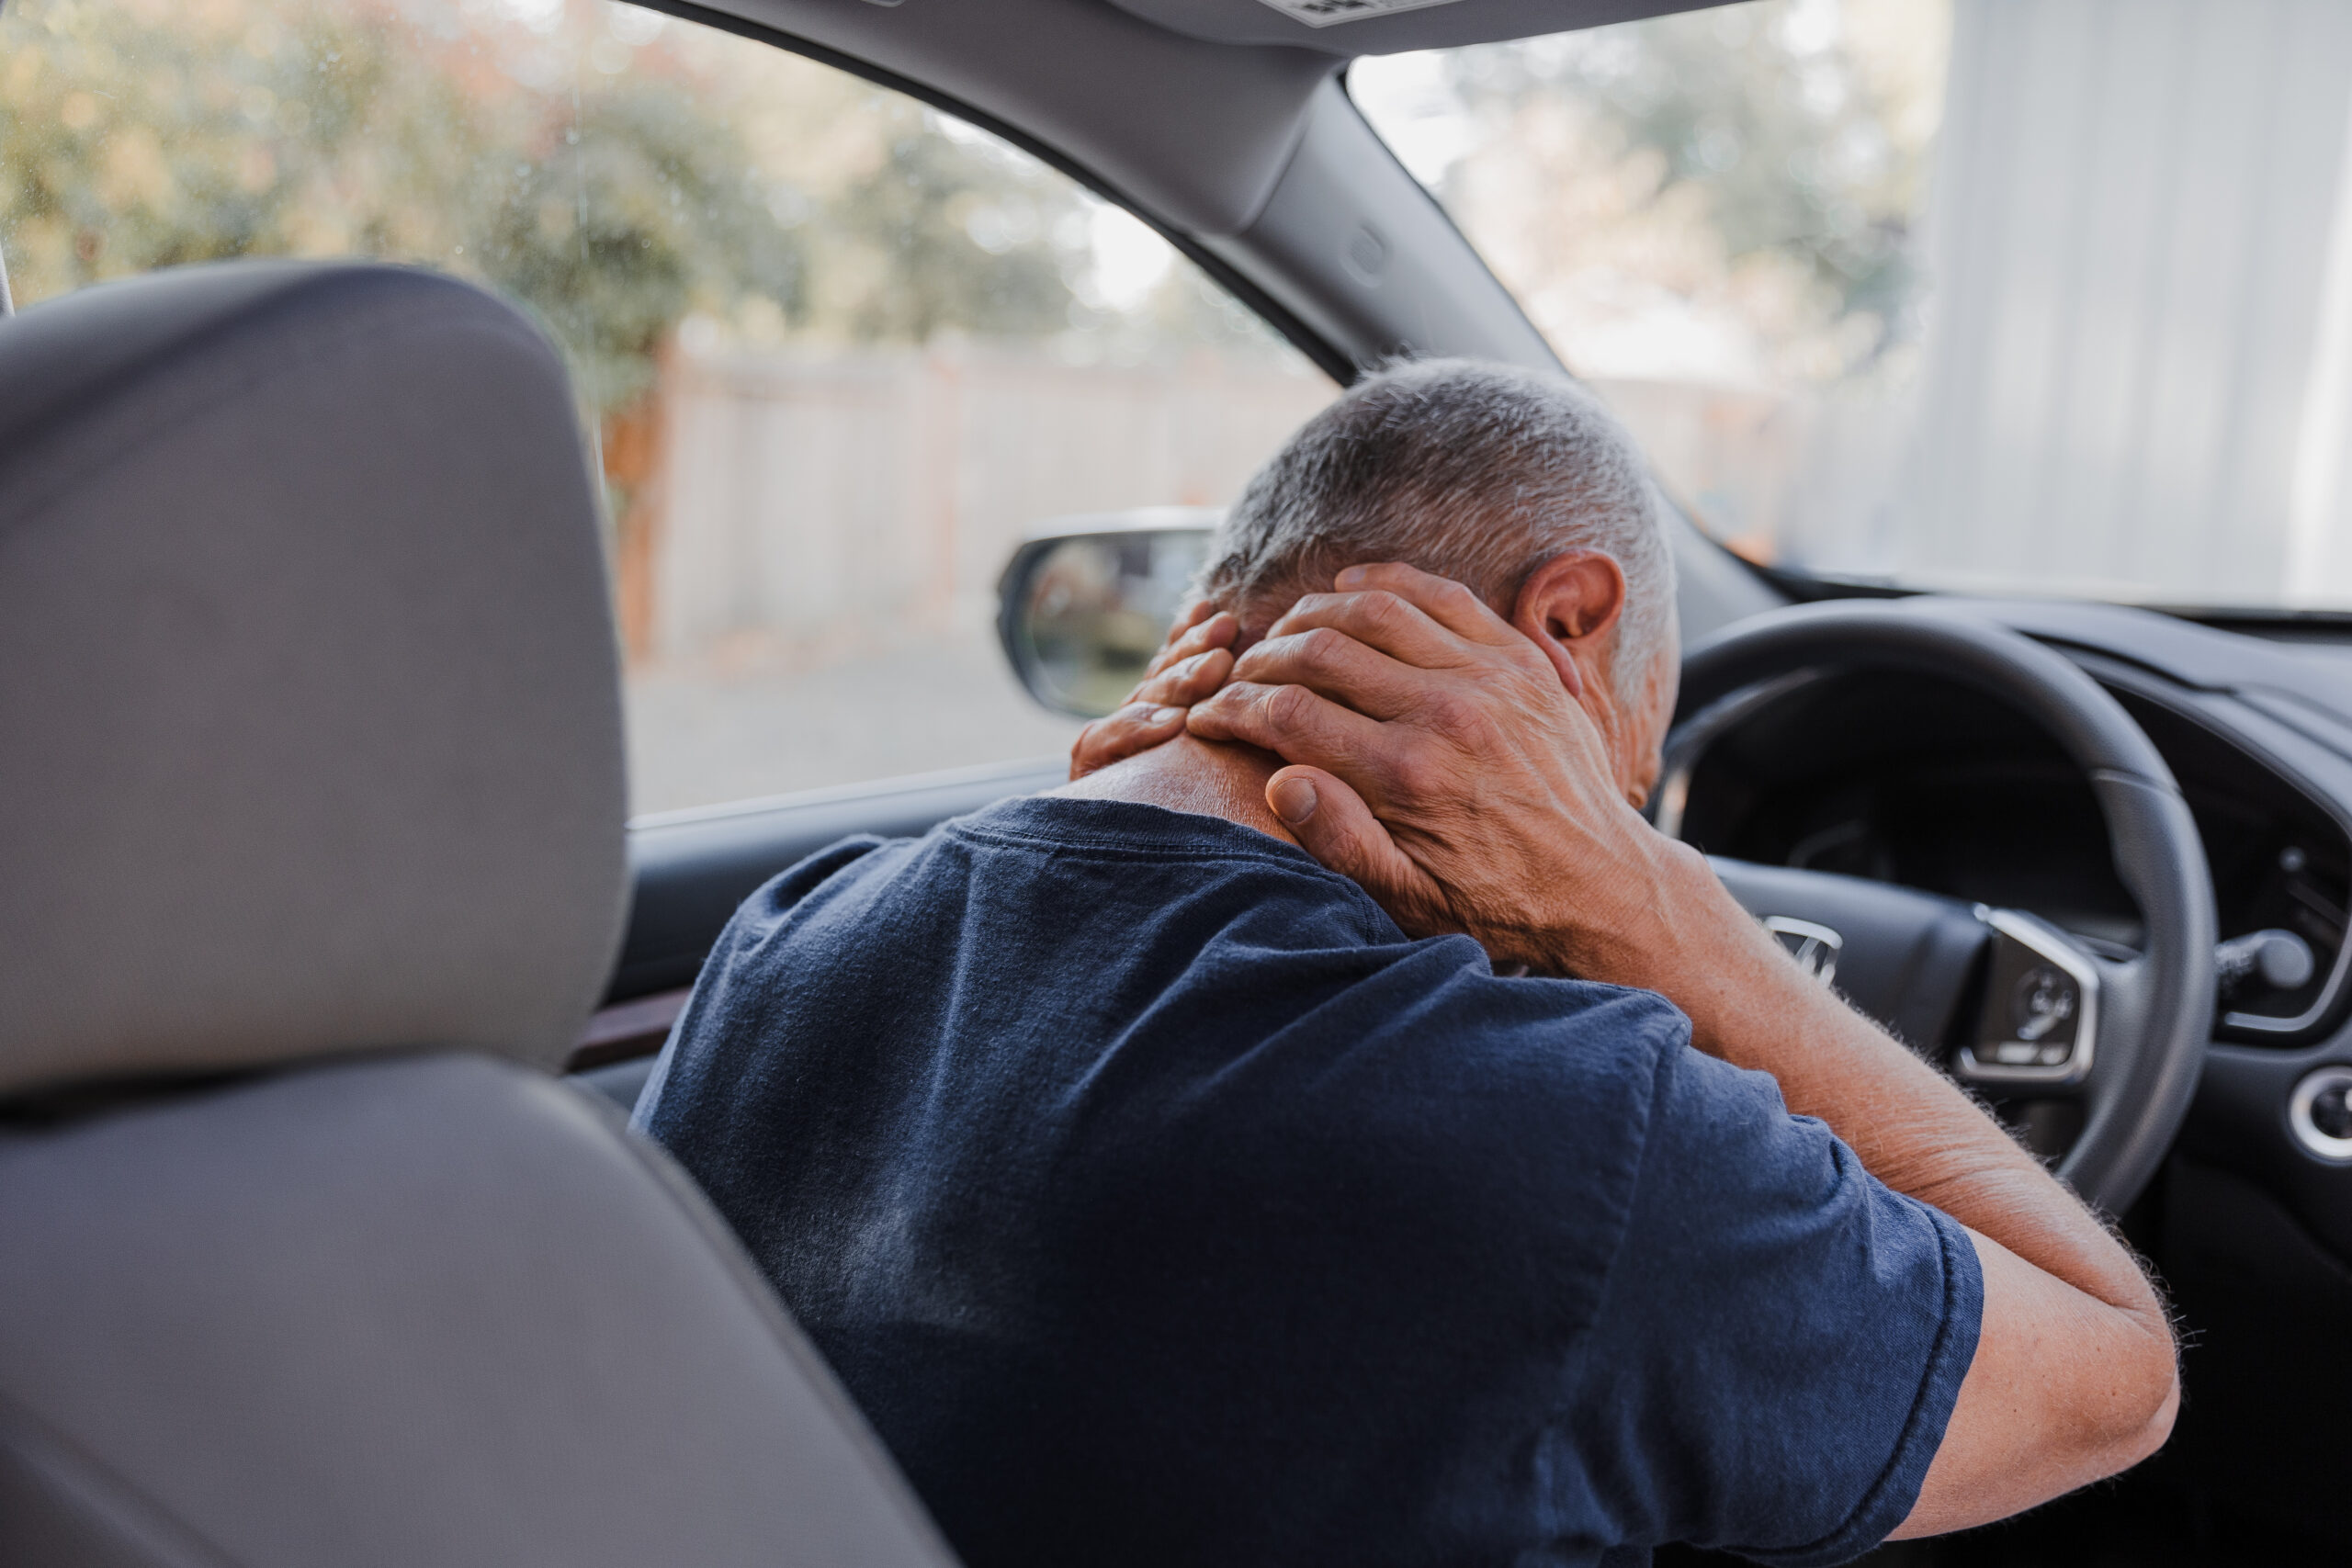 Middle-aged man with neck pain after being rear ended in a car accident